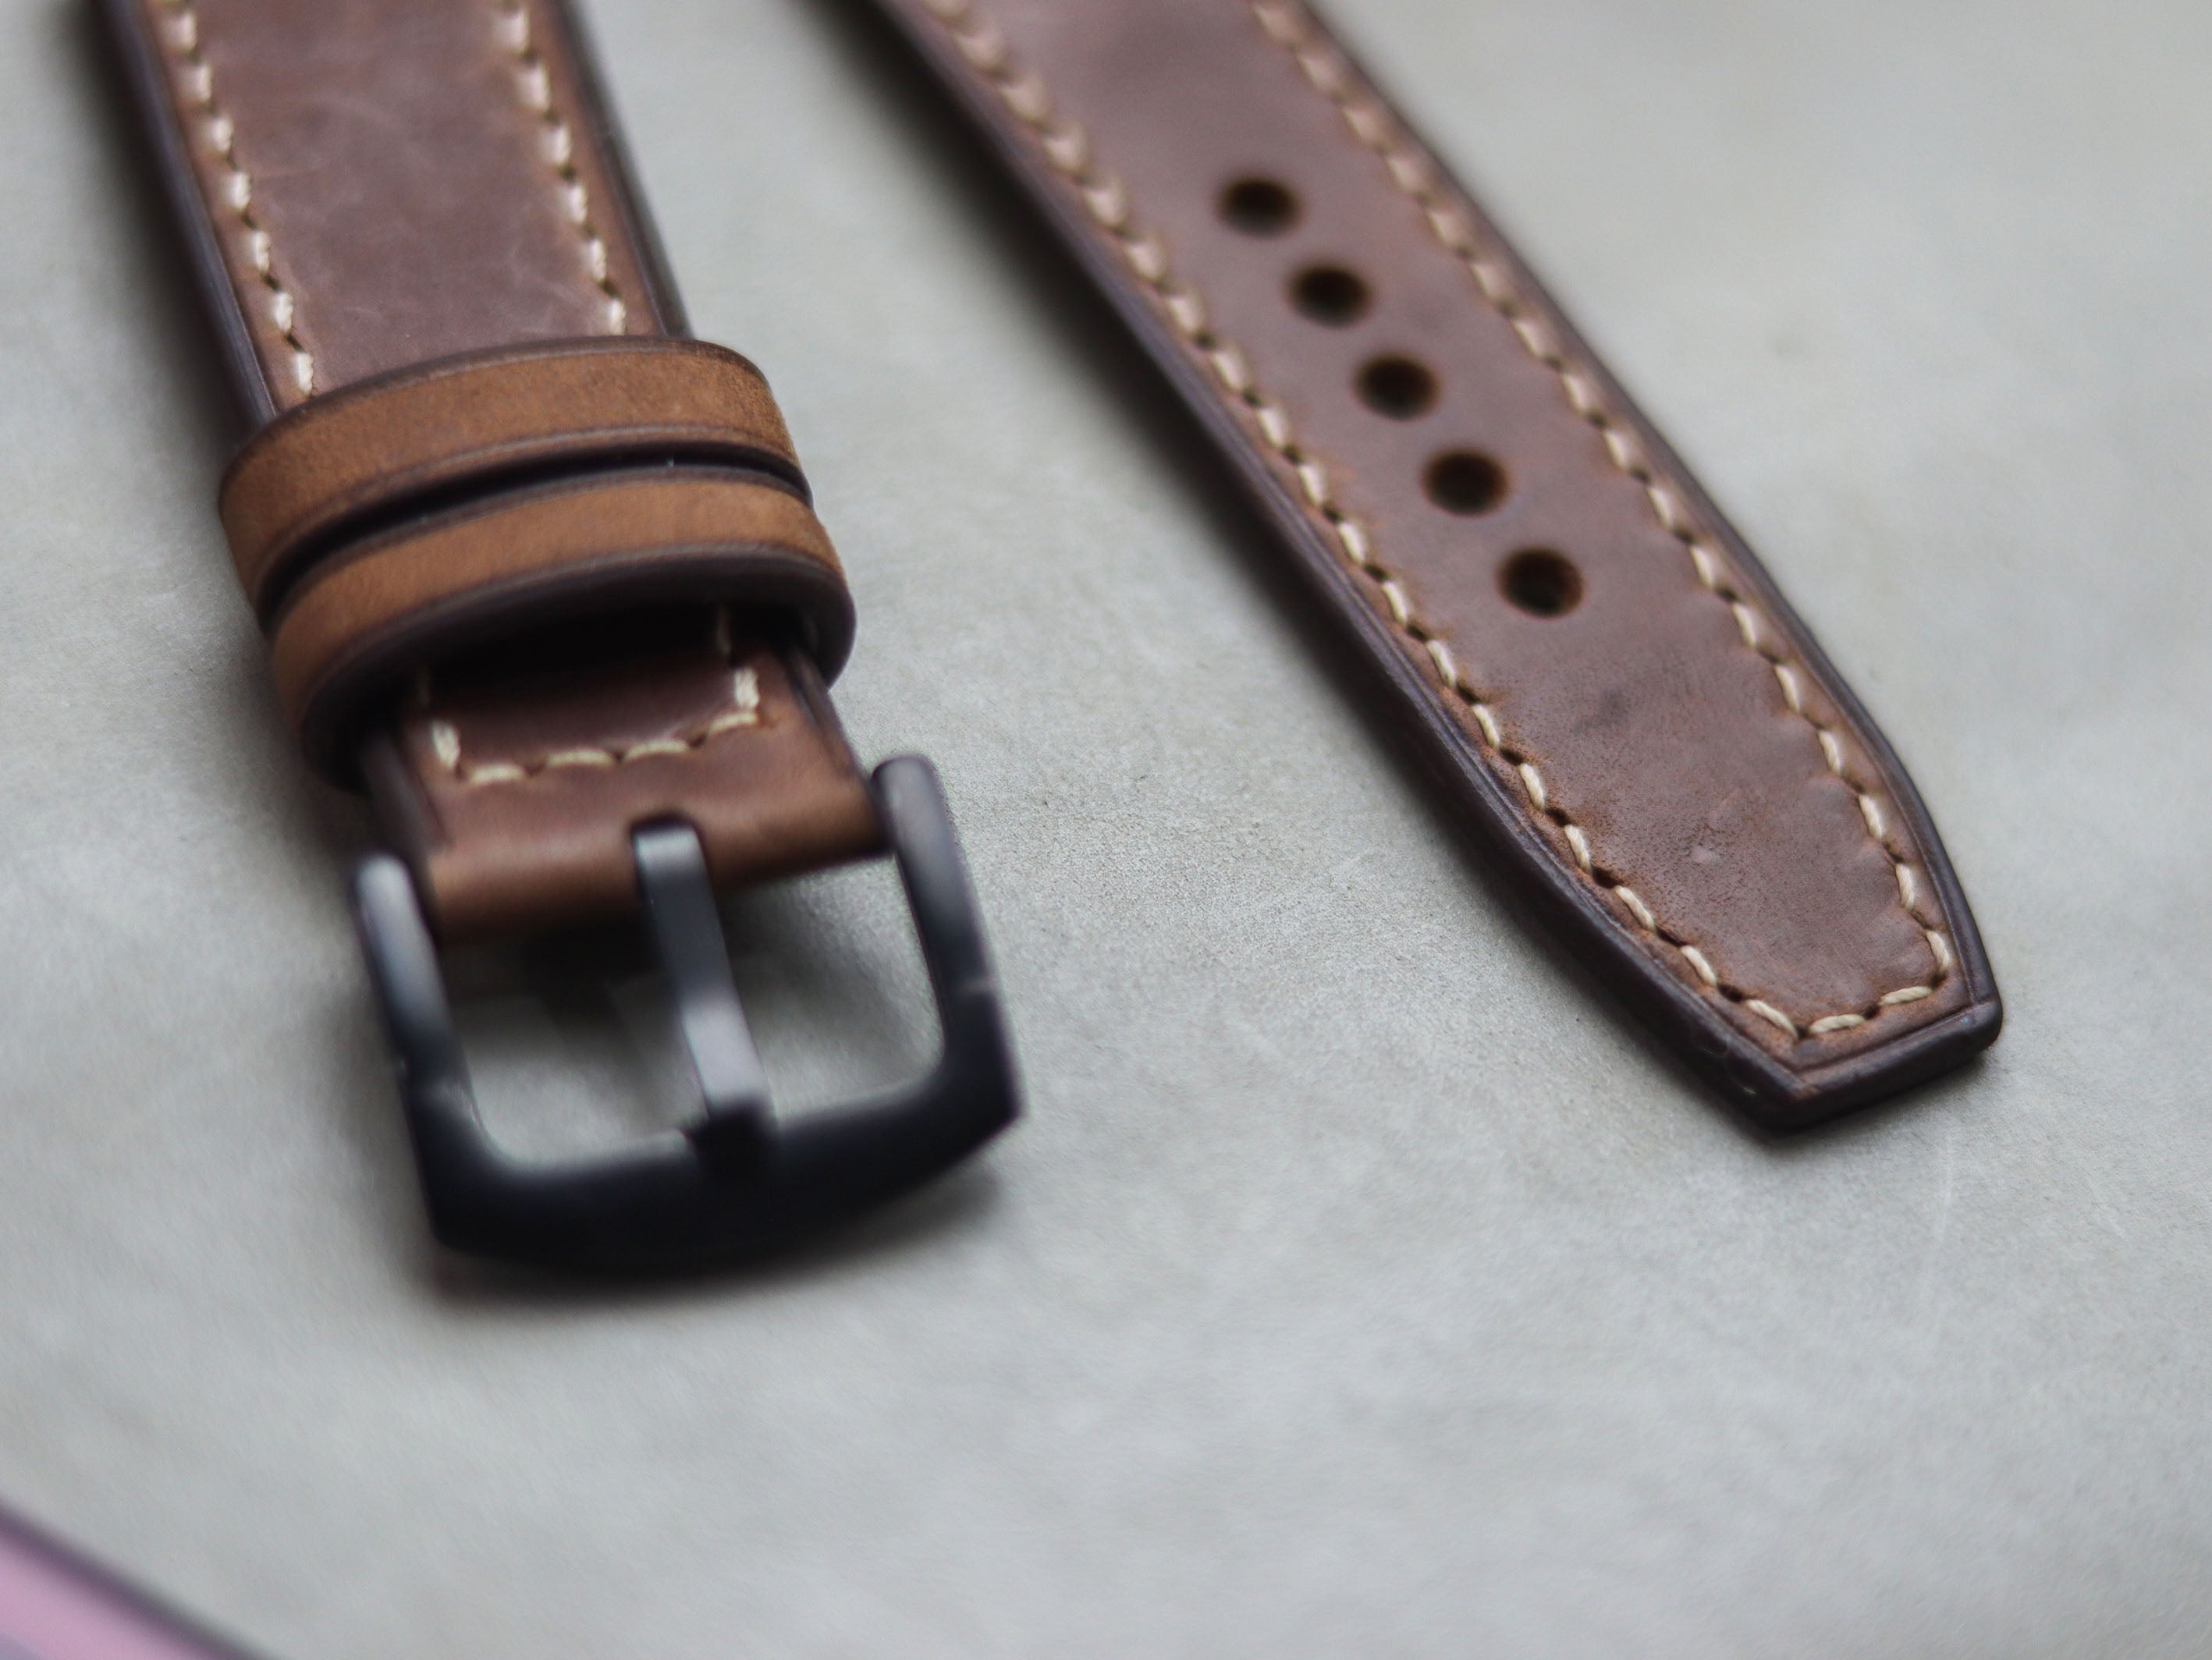 RUSTY BROWN HAND-CRAFTED WATCH STRAPS - BOX STITCHED